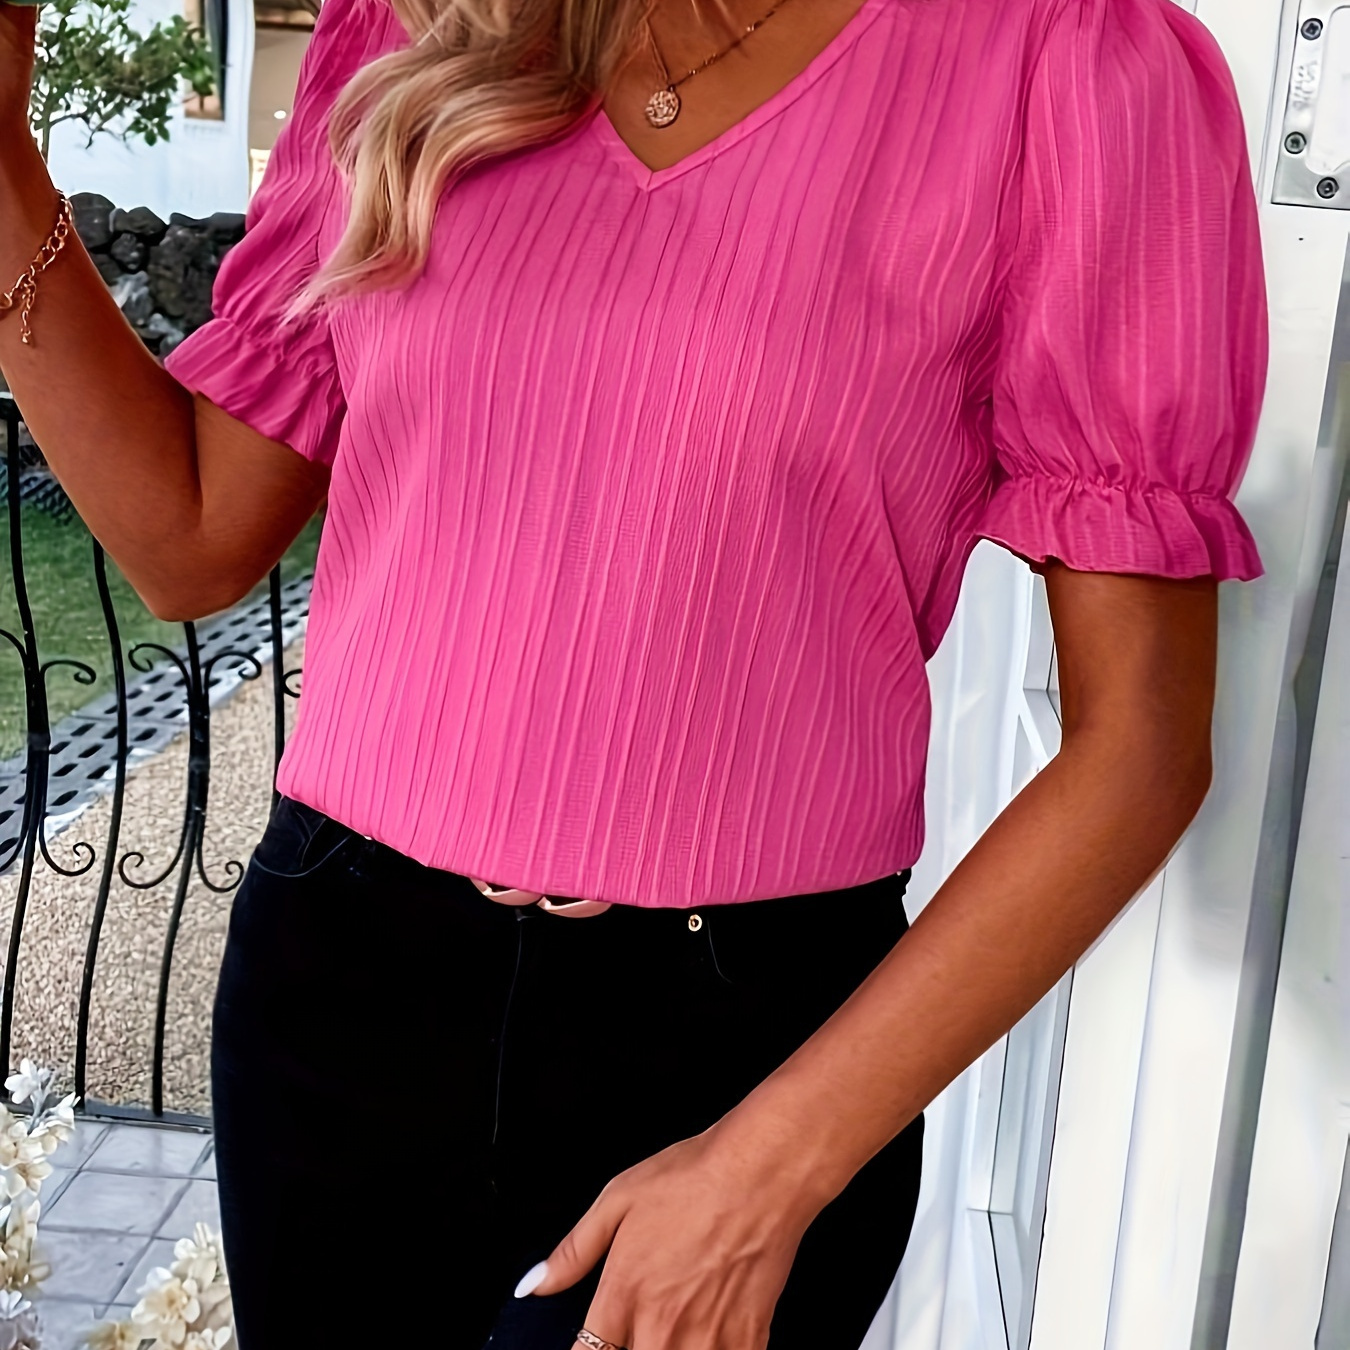 

Solid Textured V Neck Blouse, Elegant Ruffle Trim Short Sleeve Blouse For Spring & Summer, Women's Clothing Wedding Holiday Vacation